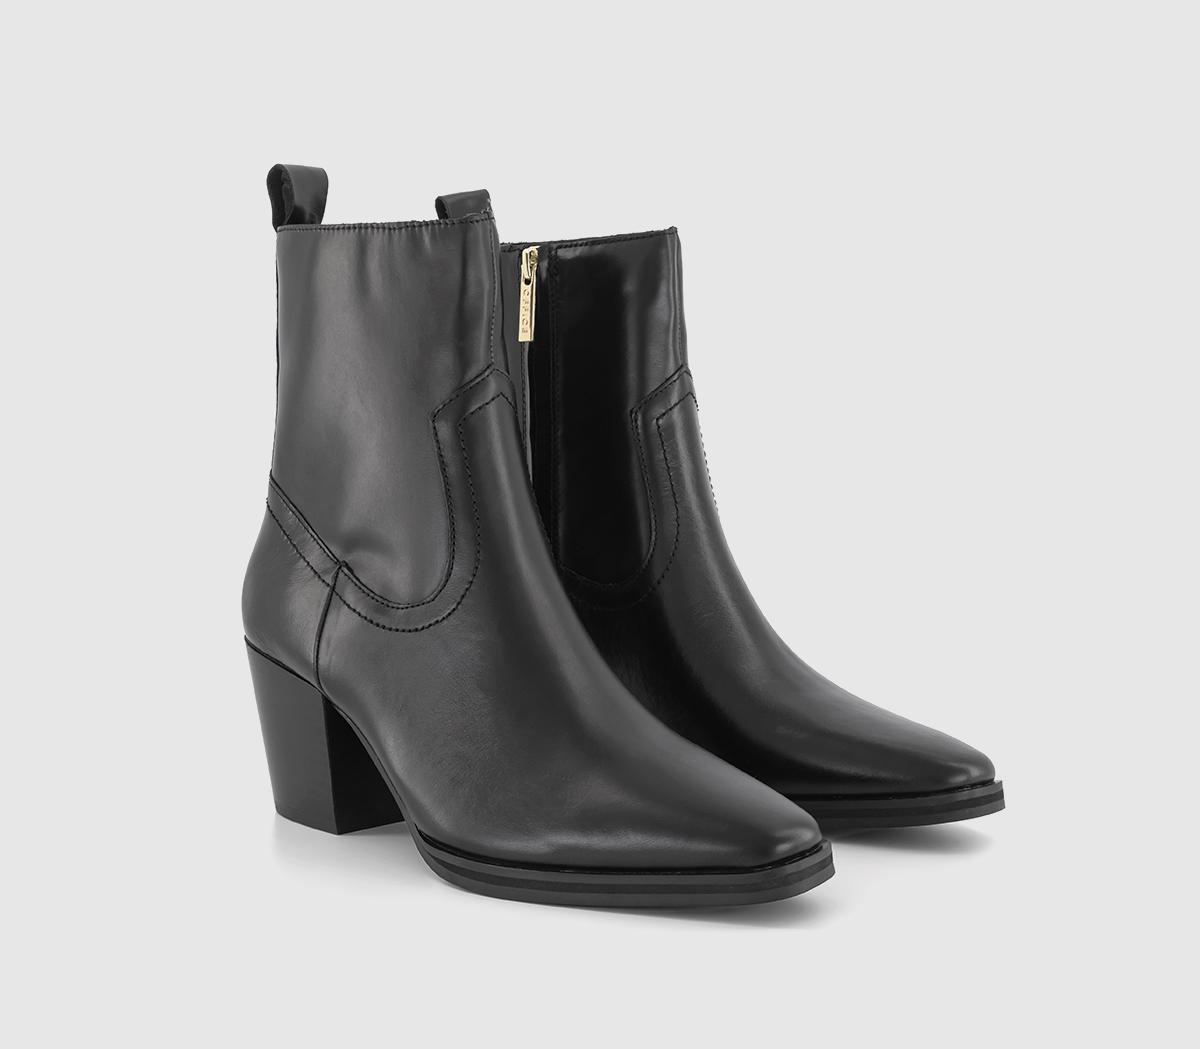 OFFICE Anika Western Ankle Boots Black Leather - Women's Ankle Boots